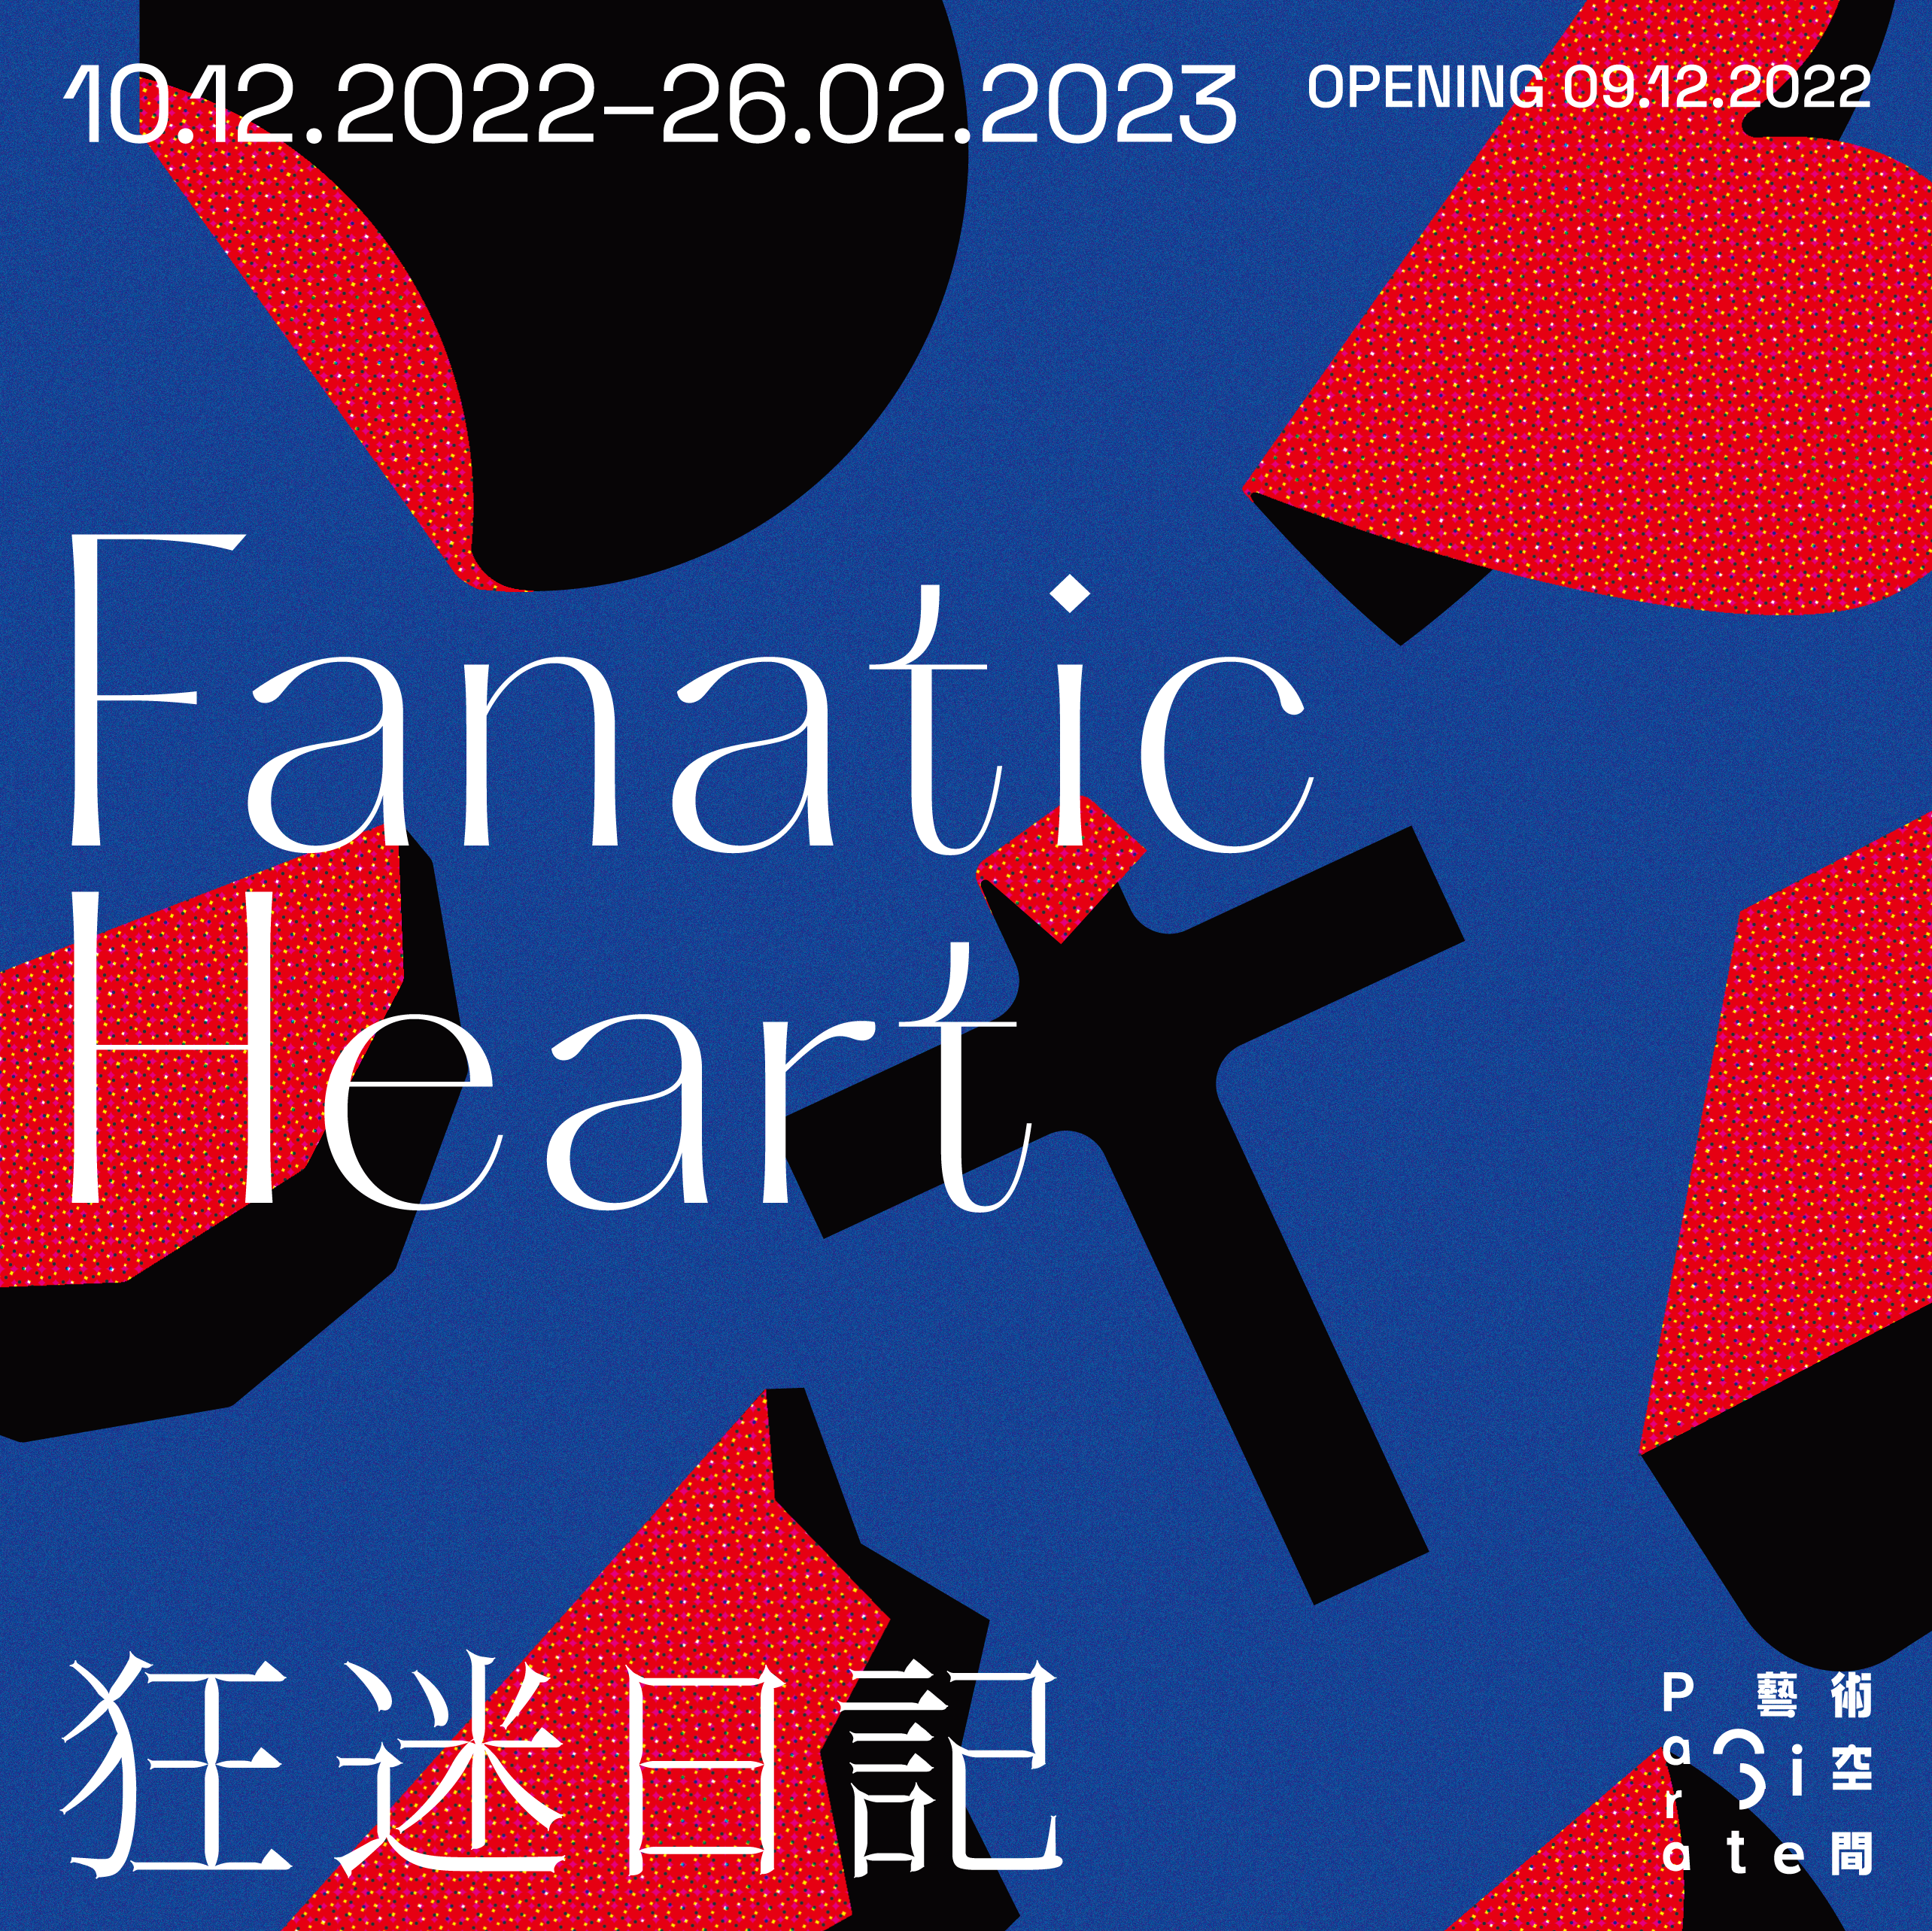 Sin Wai Kin’s It’s Always You is presented in Para Site’s group exhibition “Fanatic Heart”